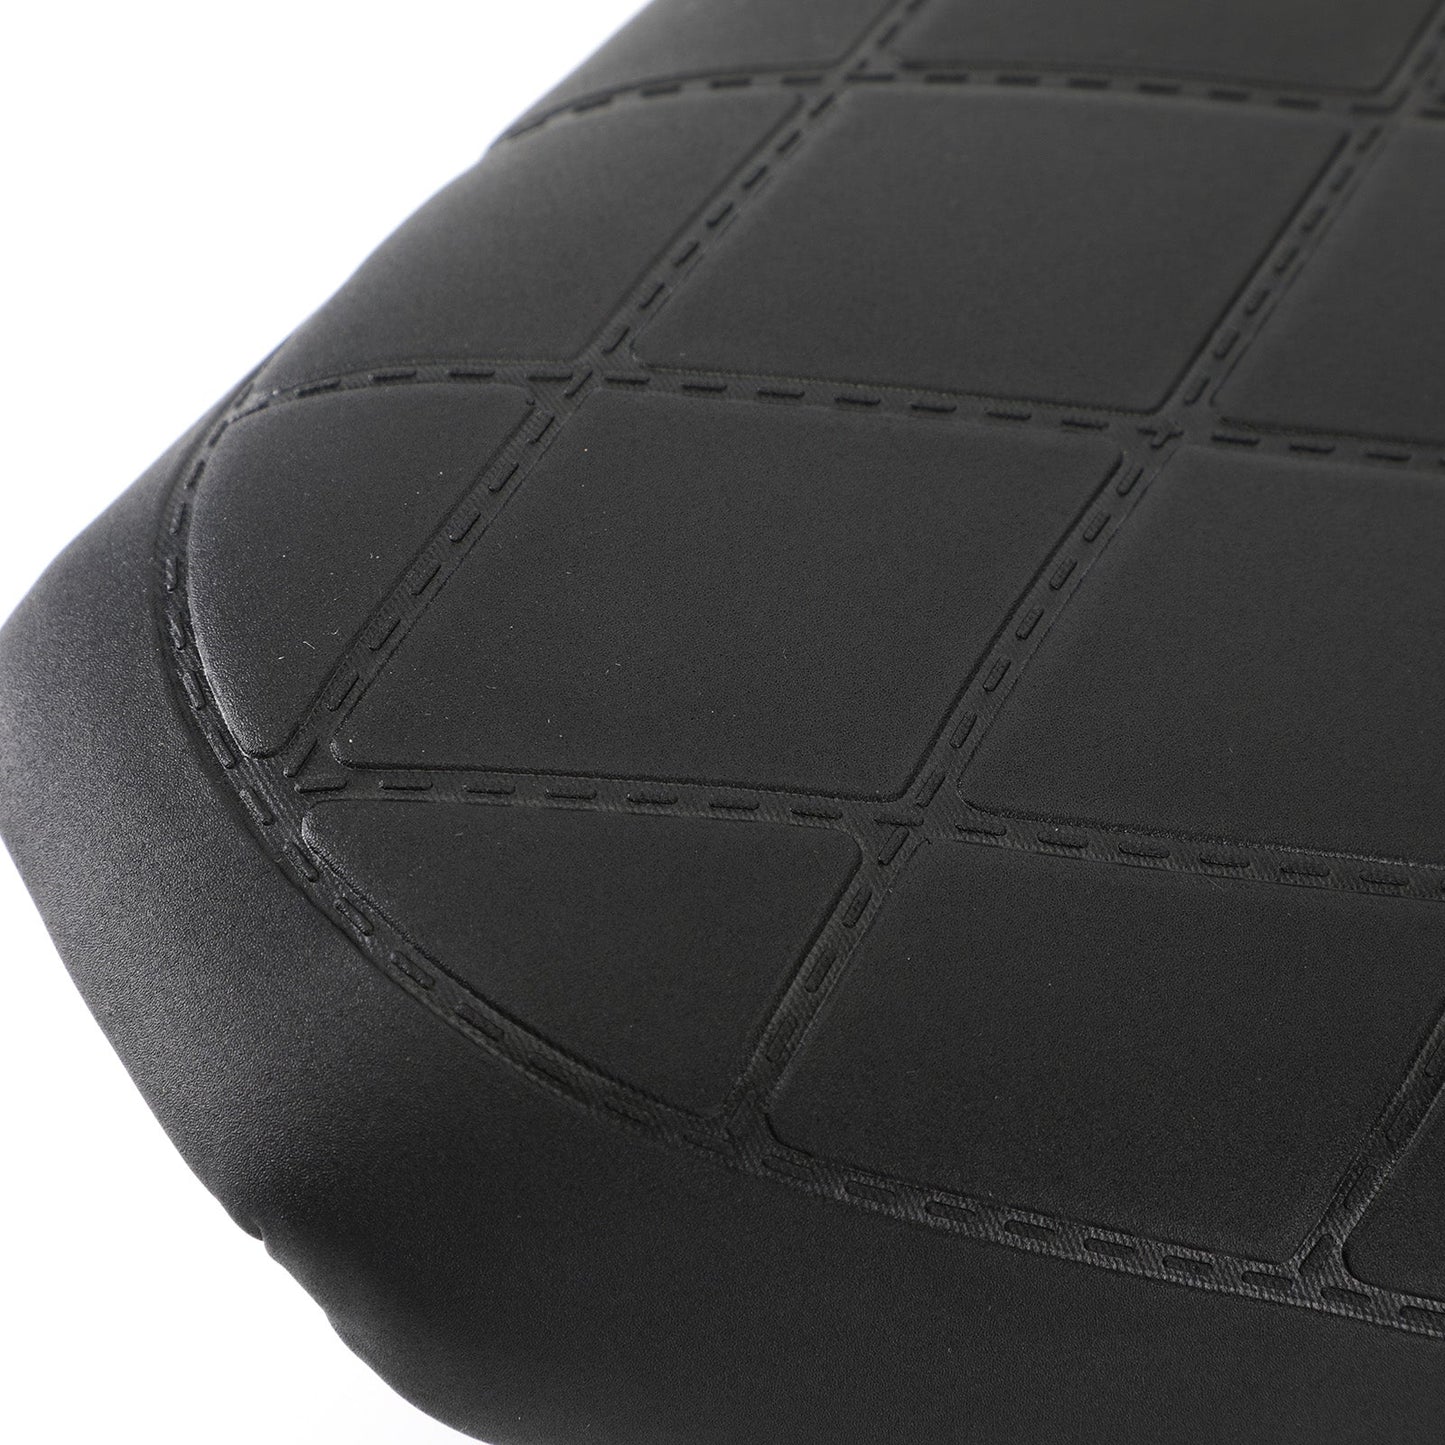 NEW FRONT DRIVER SEAT CUSHION Fit for HONDA REBEL CMX 500 300 2017-2021 BLACK